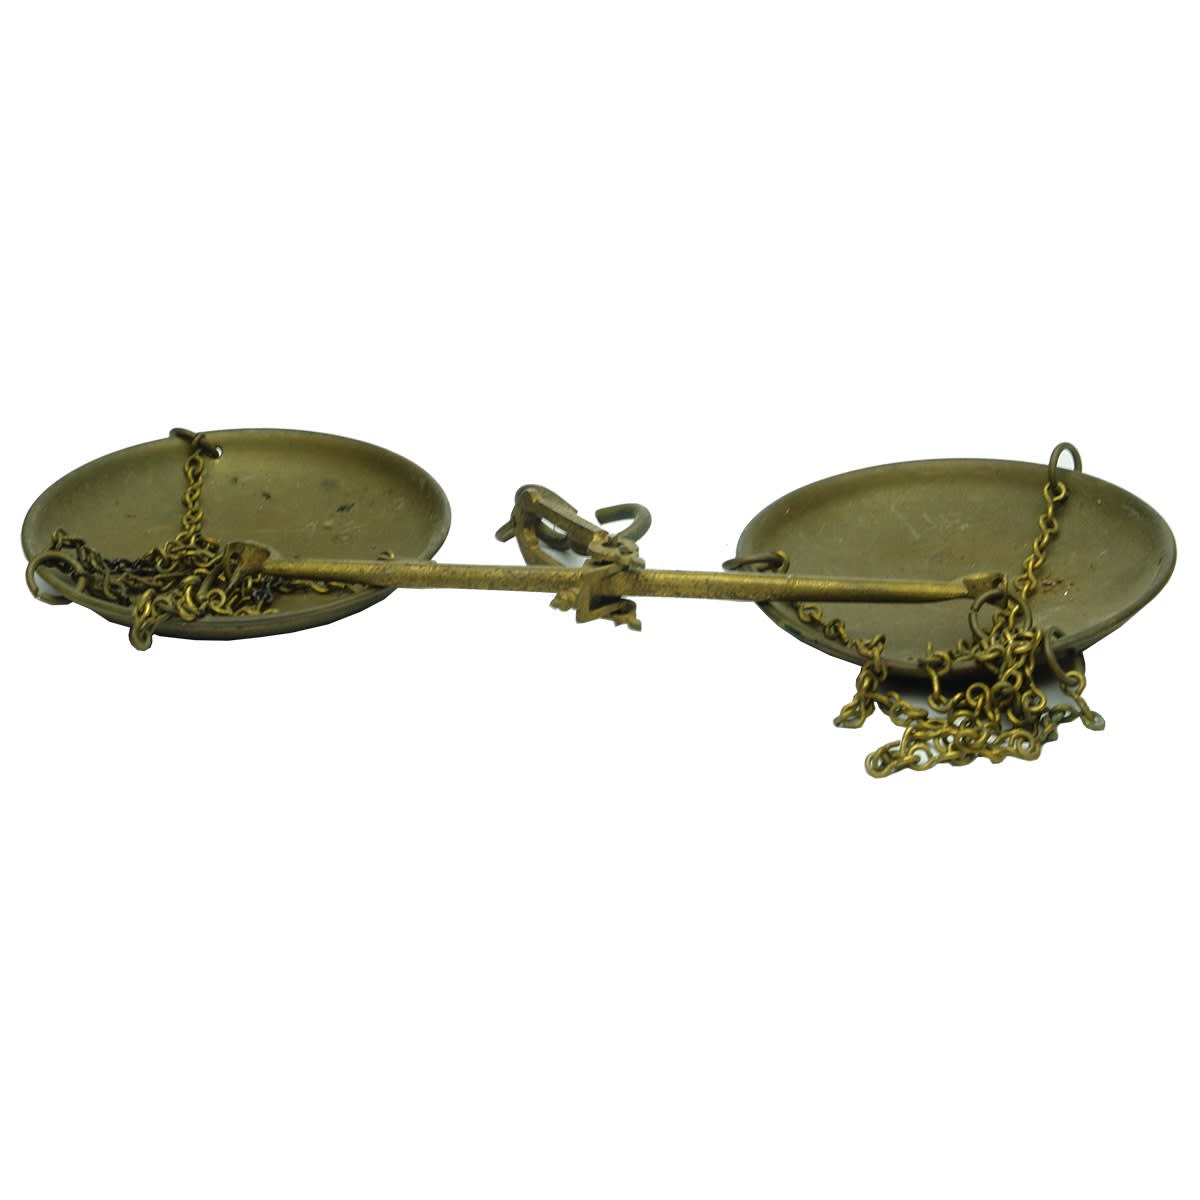 Miscellaneous. W. & T. Avery Patent Latet Beach Gold Scales.